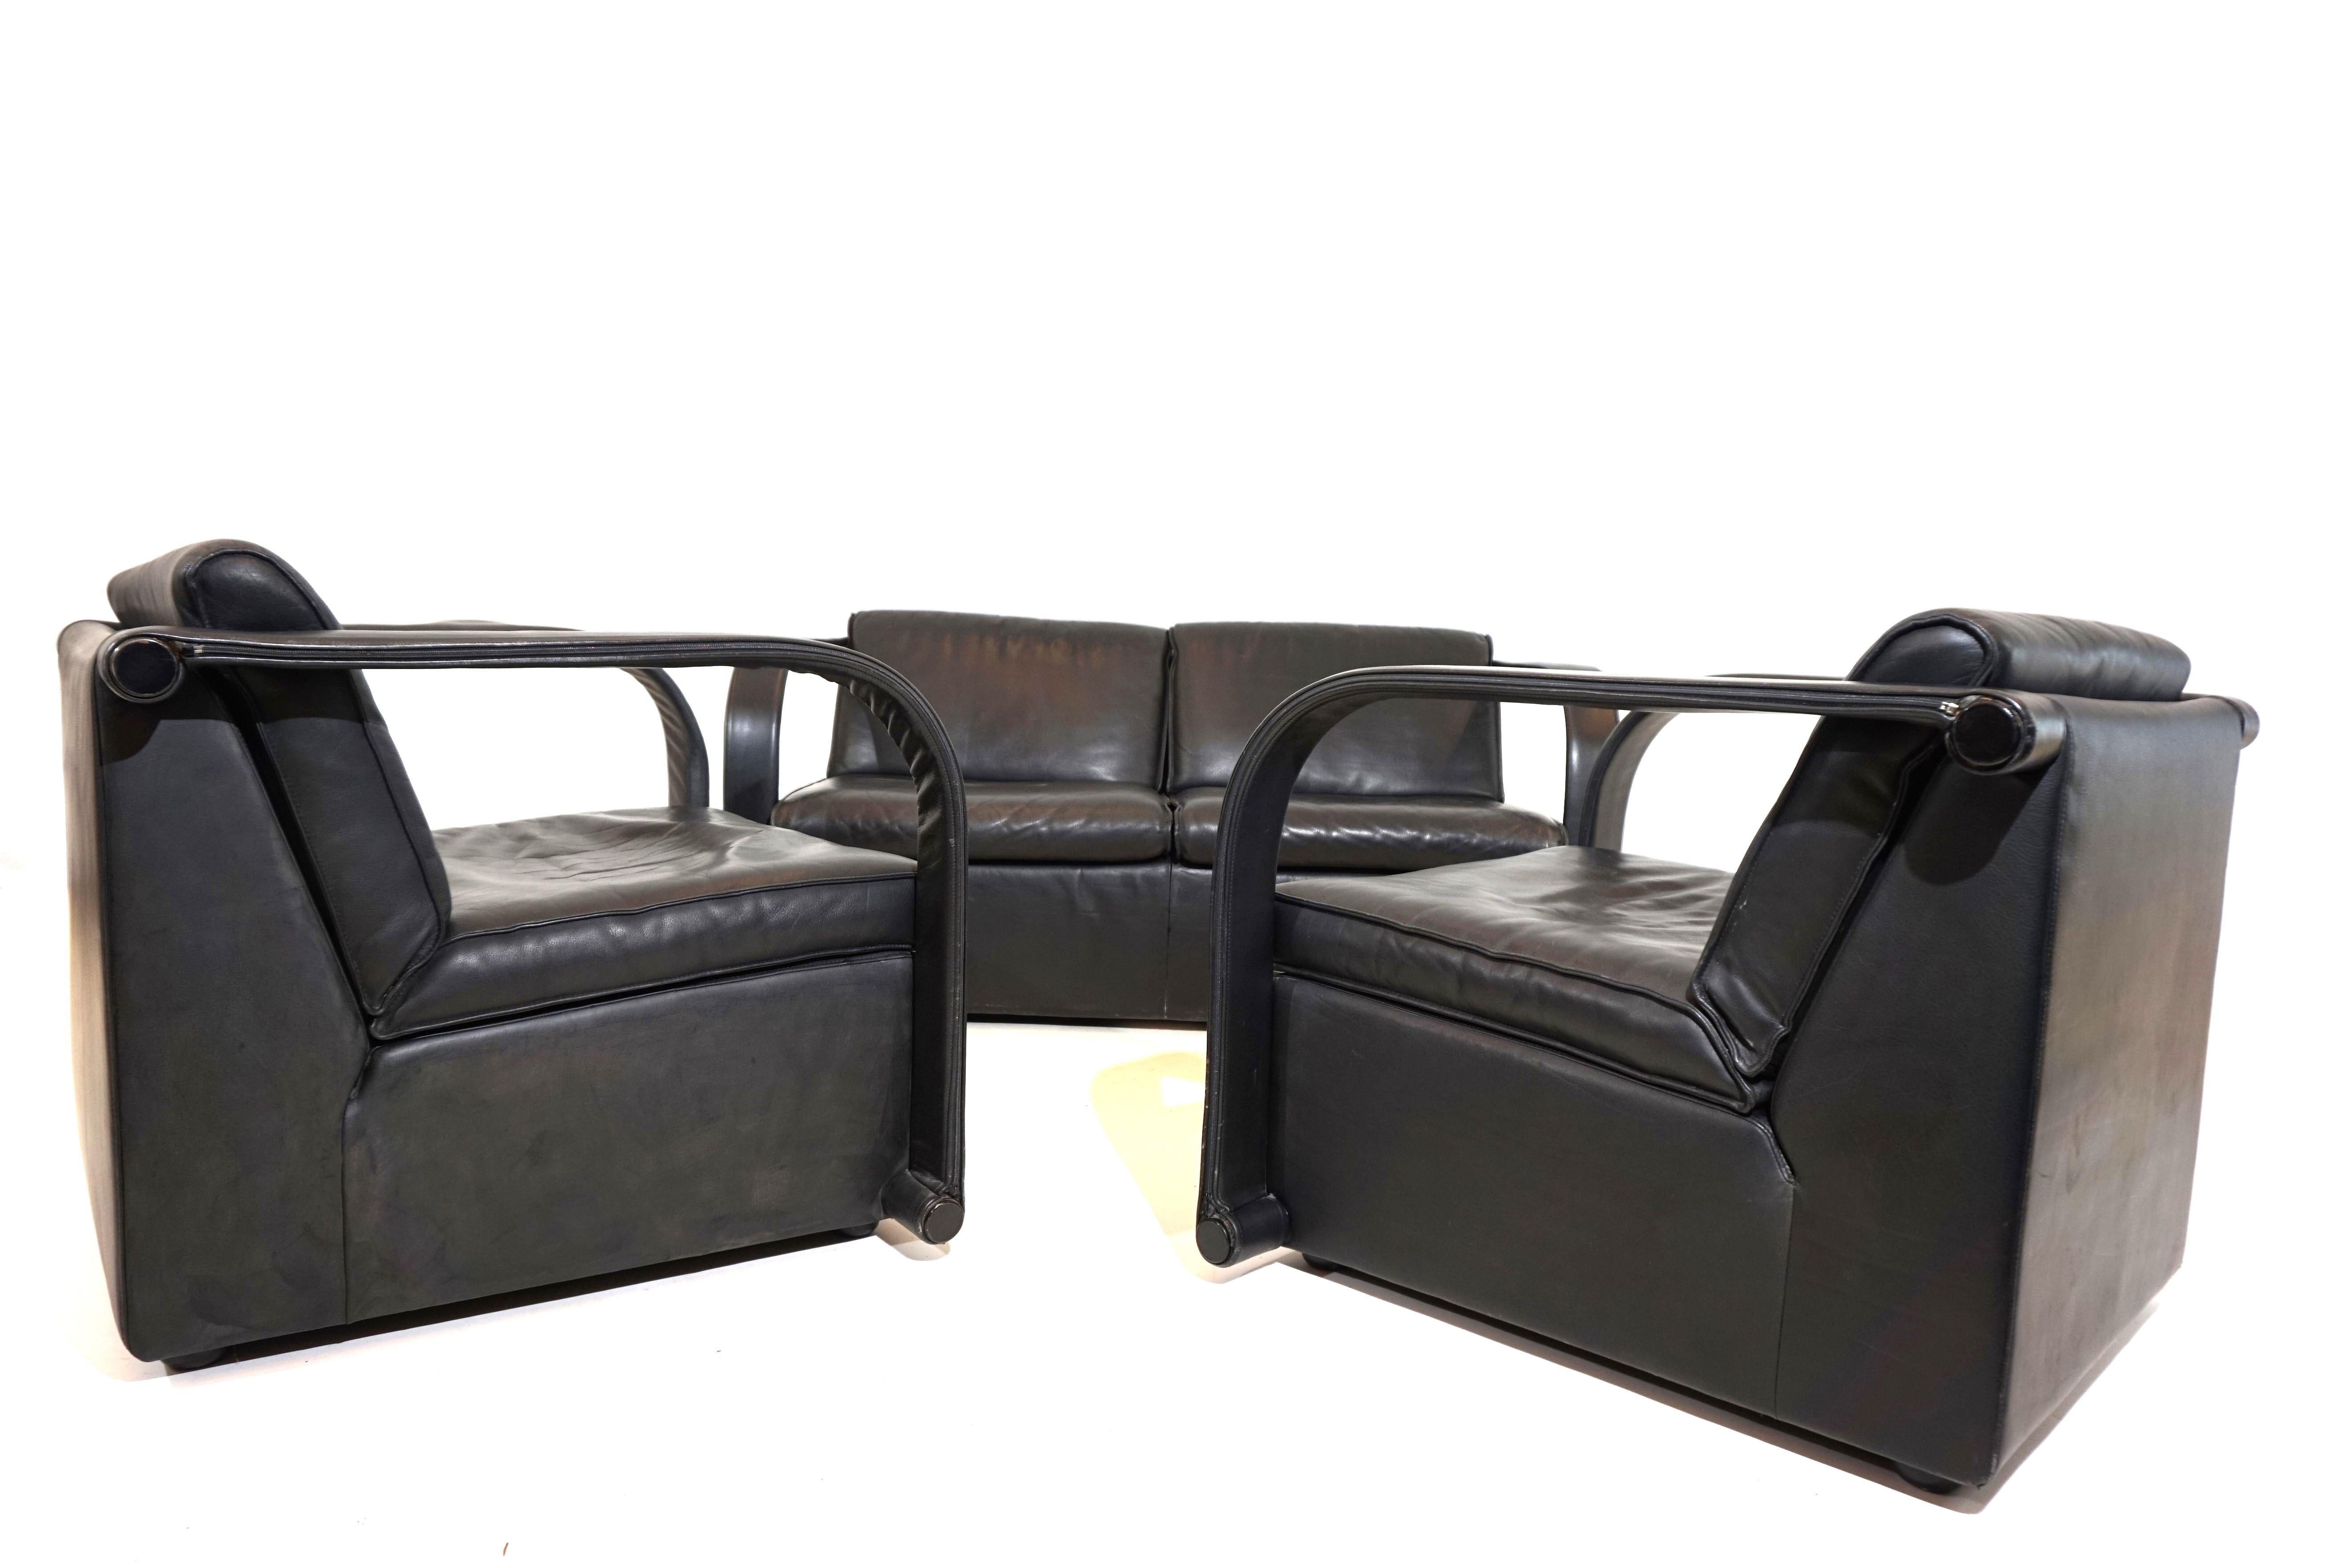 This Arcona leather set consists of a 2-seater sofa and two armchairs. The thick black leather is in very good condition with minimal signs of wear. The back and seat cushions, as well as the leather coverings on the armrests, are attached with a